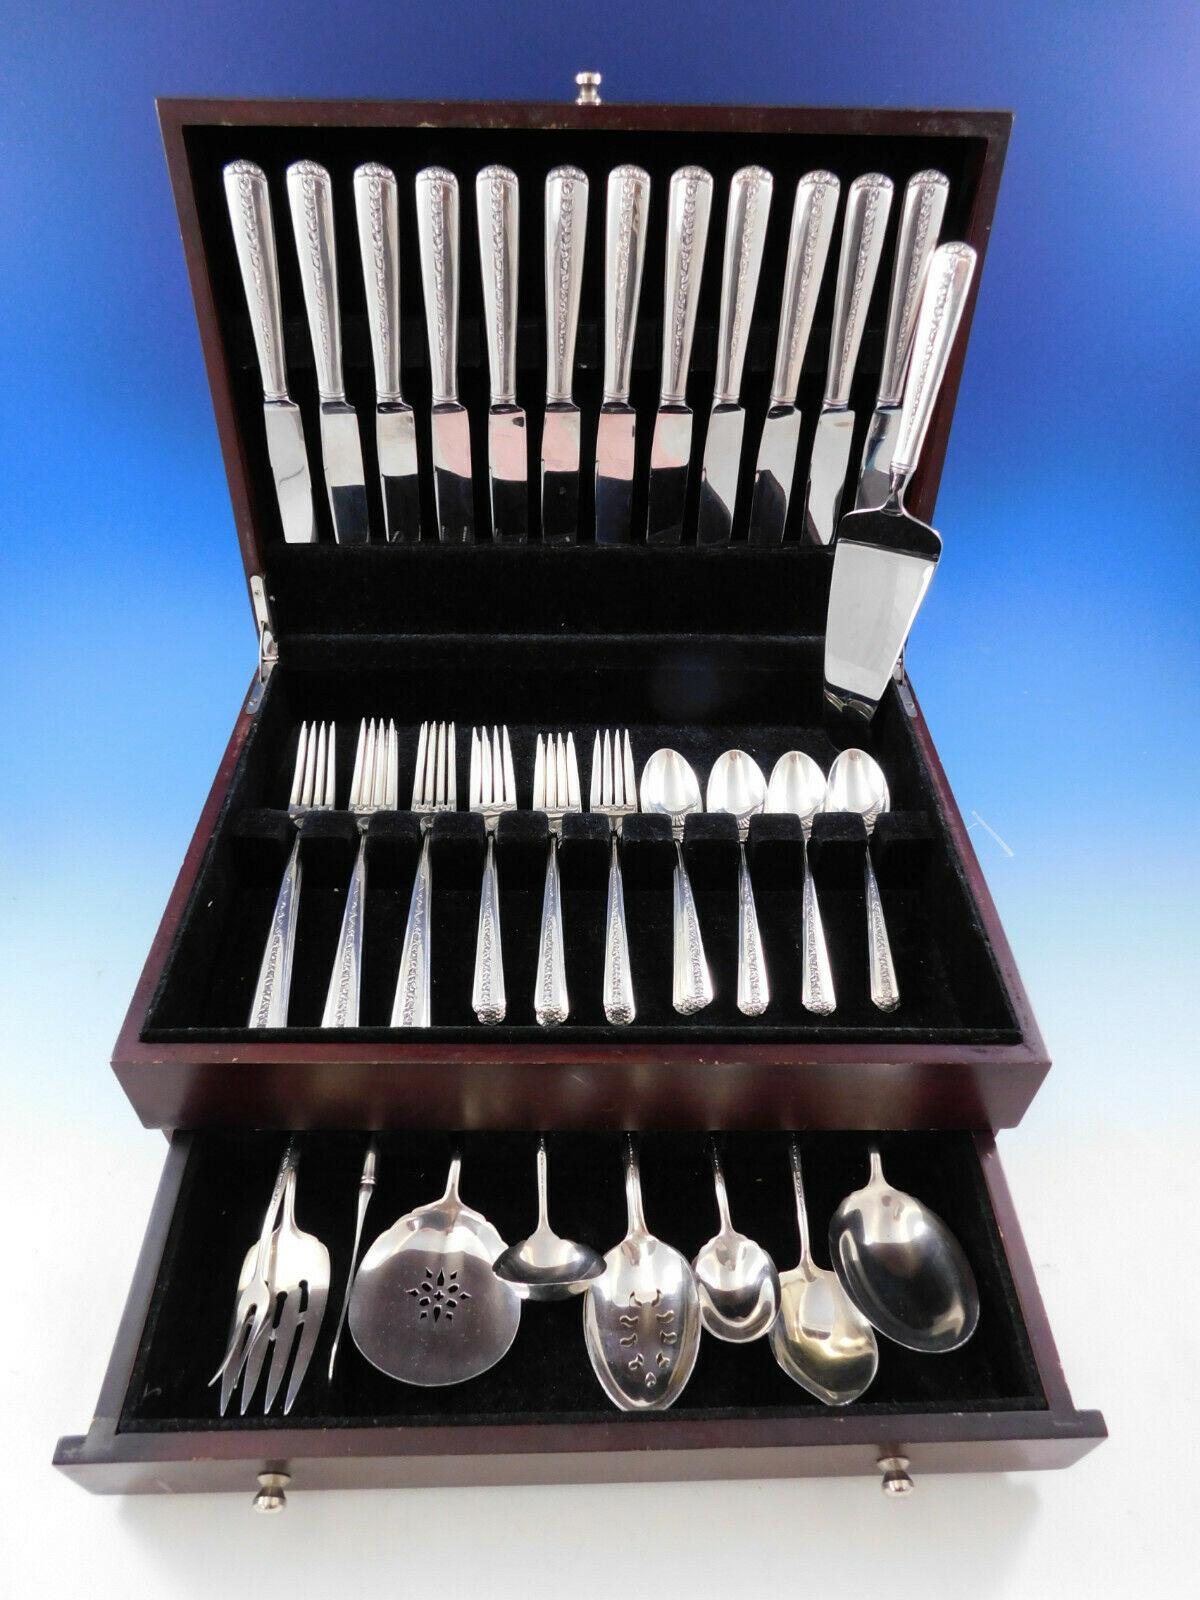 Dinner size Rambler Rose by Towle sterling silver flatware set, 59 pieces. This set includes:

12 dinner knives, 9 1/2